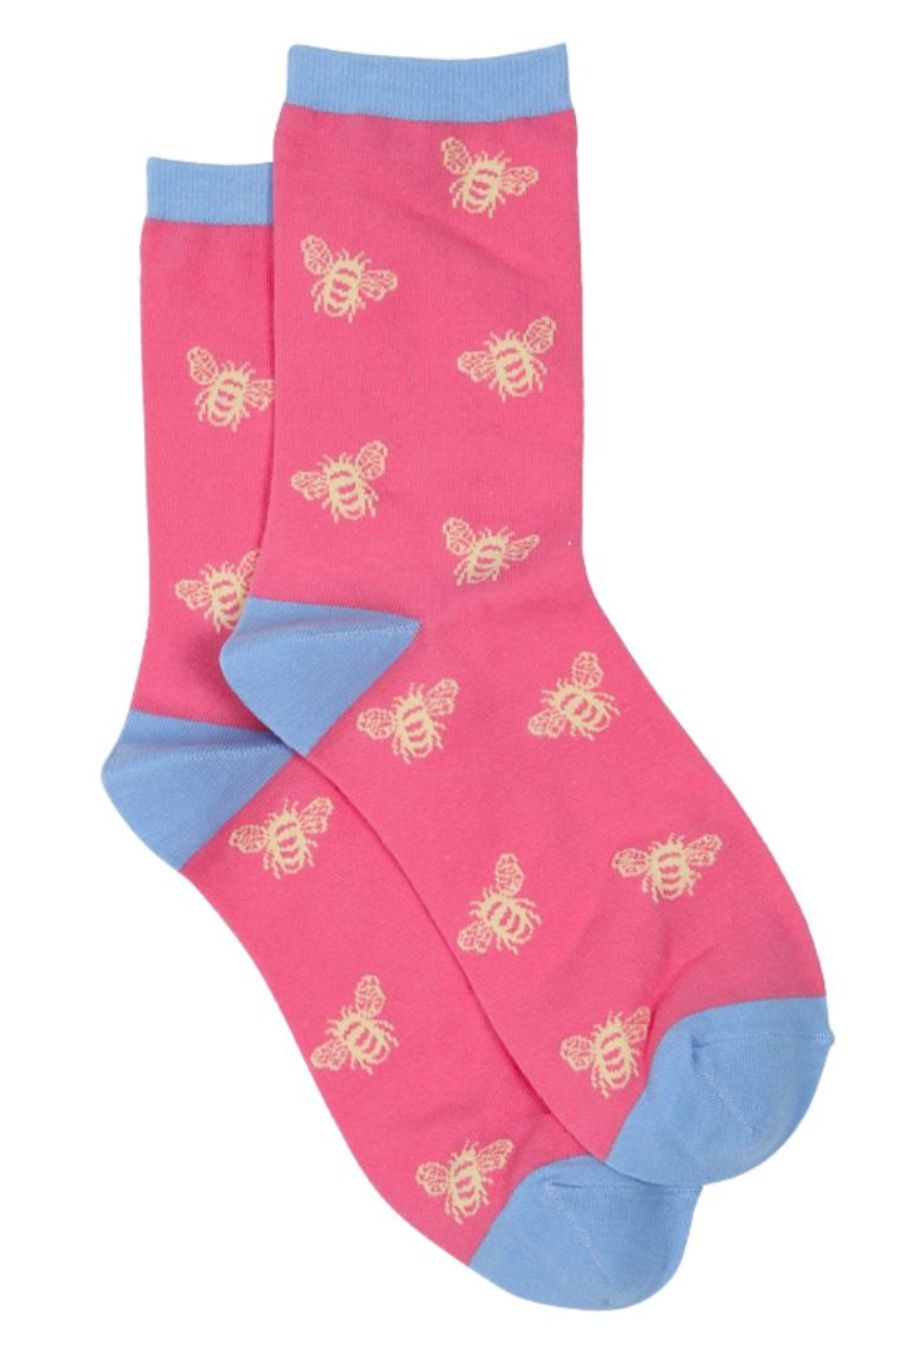 pink, blue bamboo socks with an all over bee print